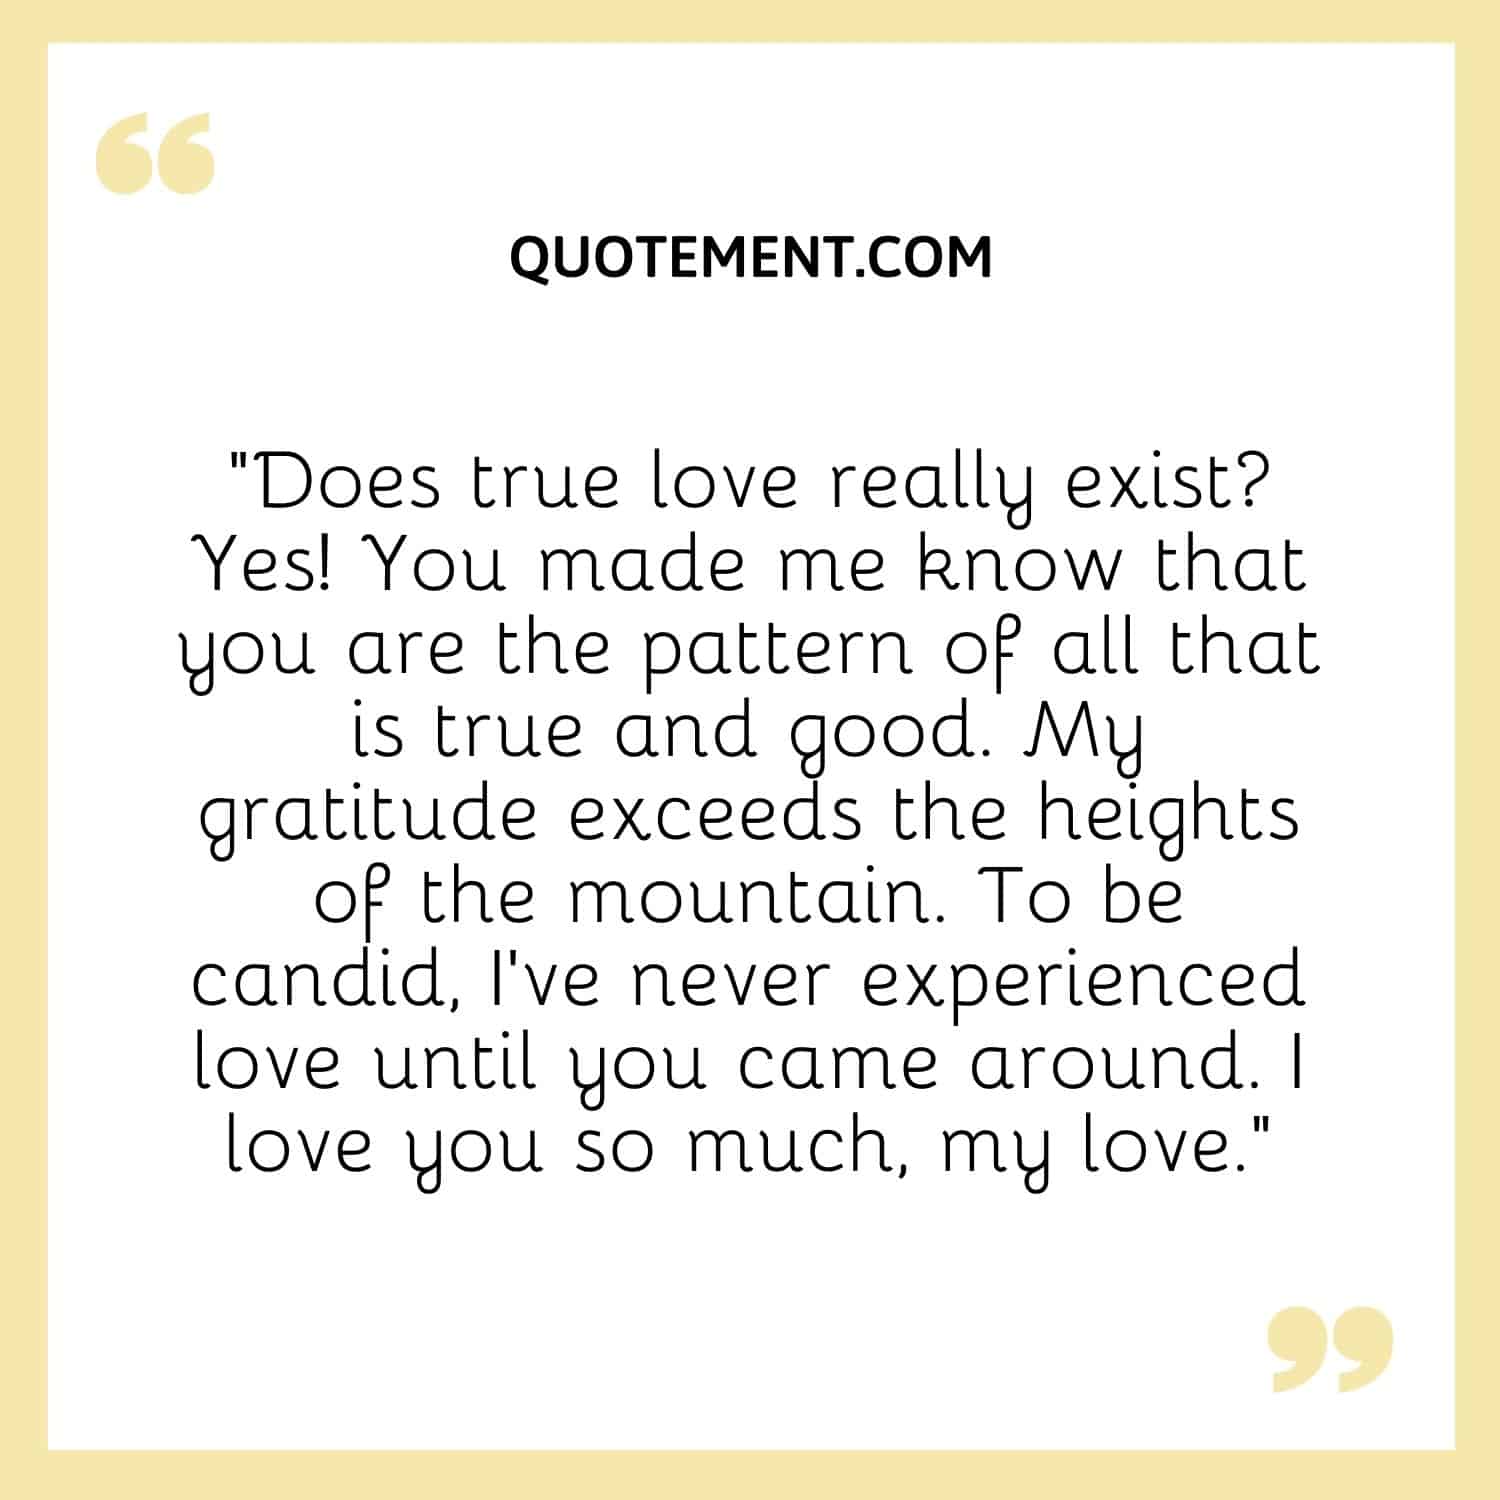 “Does true love really exist Yes! You made me know that you are the pattern of all that is true and good. My gratitude exceeds the heights of the mountain.